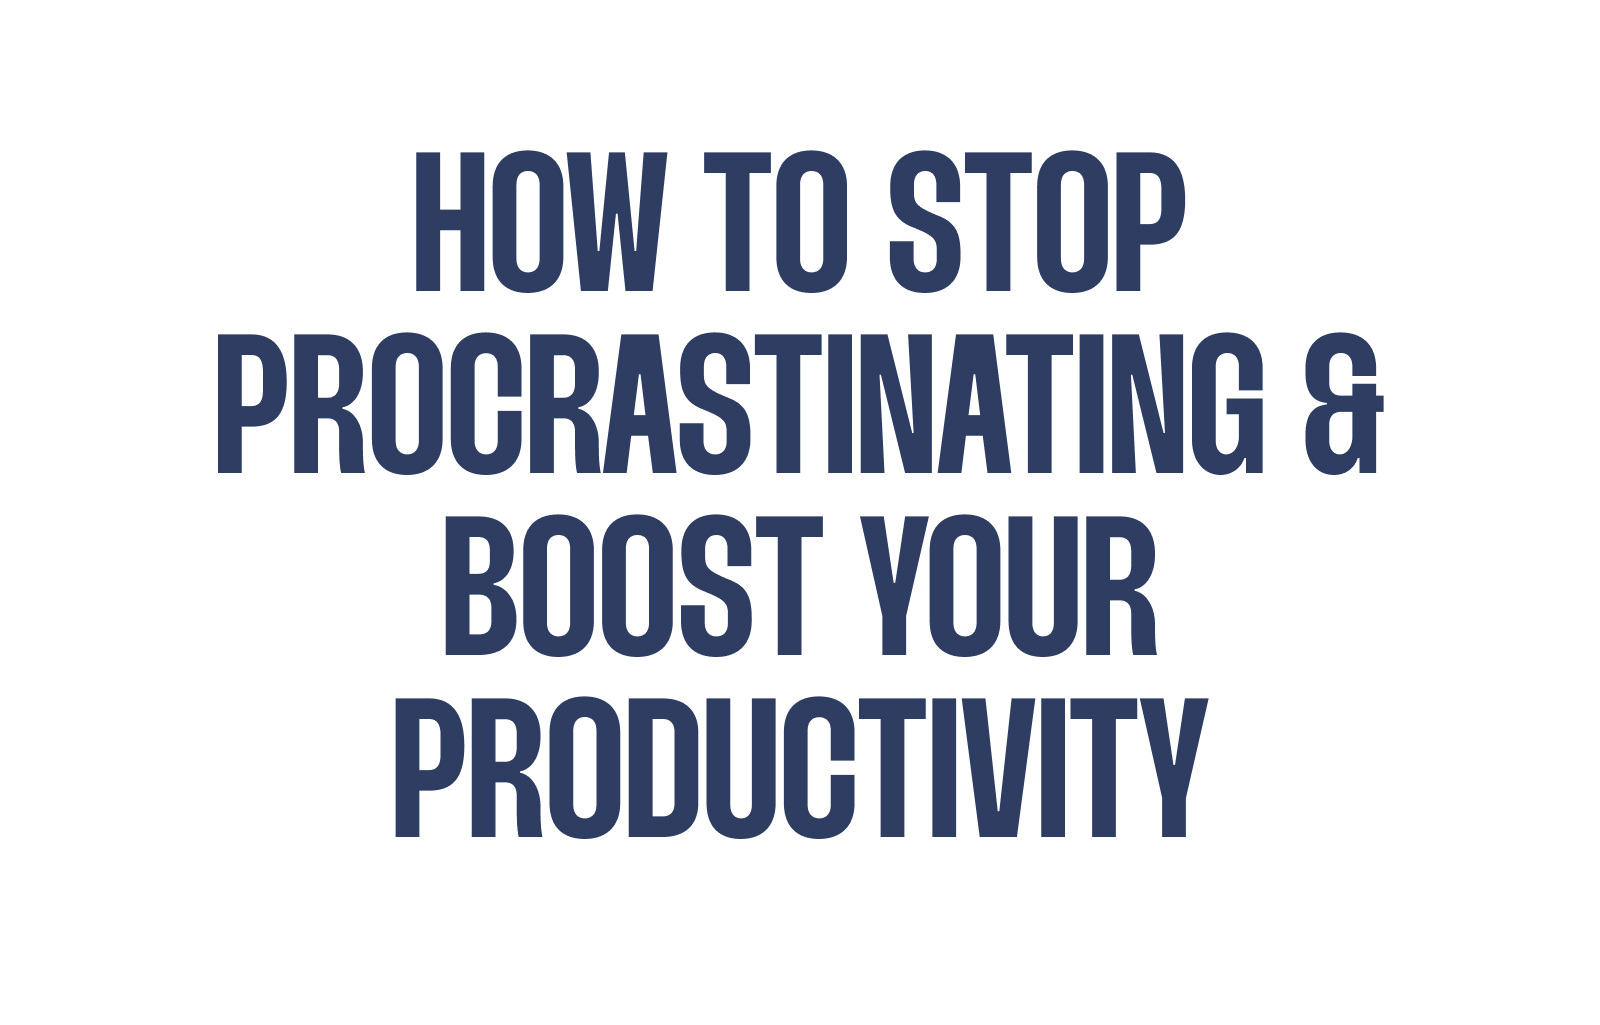 How to Stop Procrastinating & Boost Your Productivity